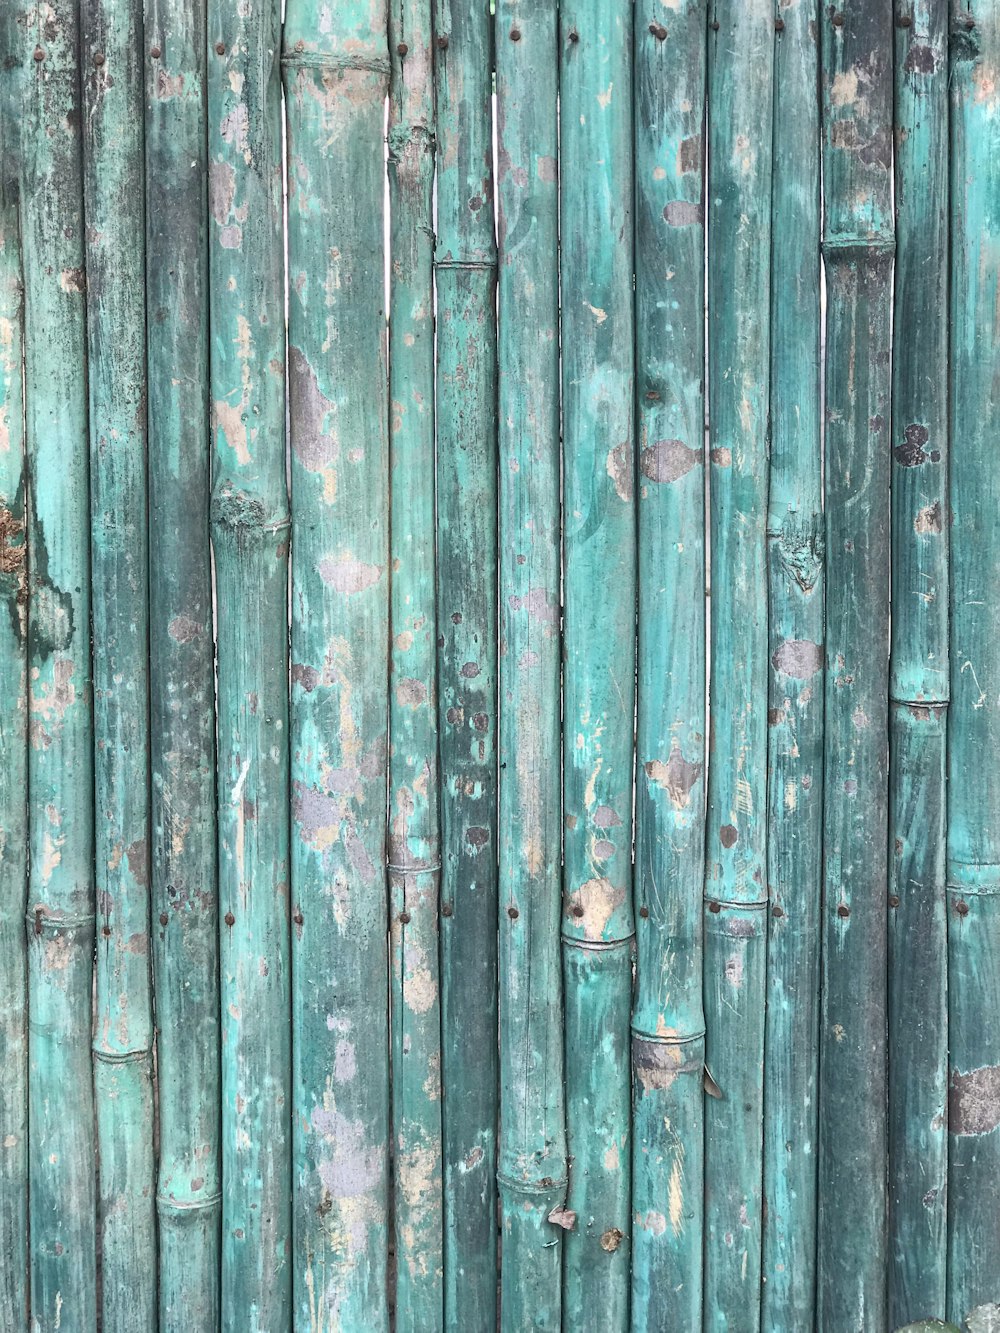 a close up of a bamboo fence with peeling paint